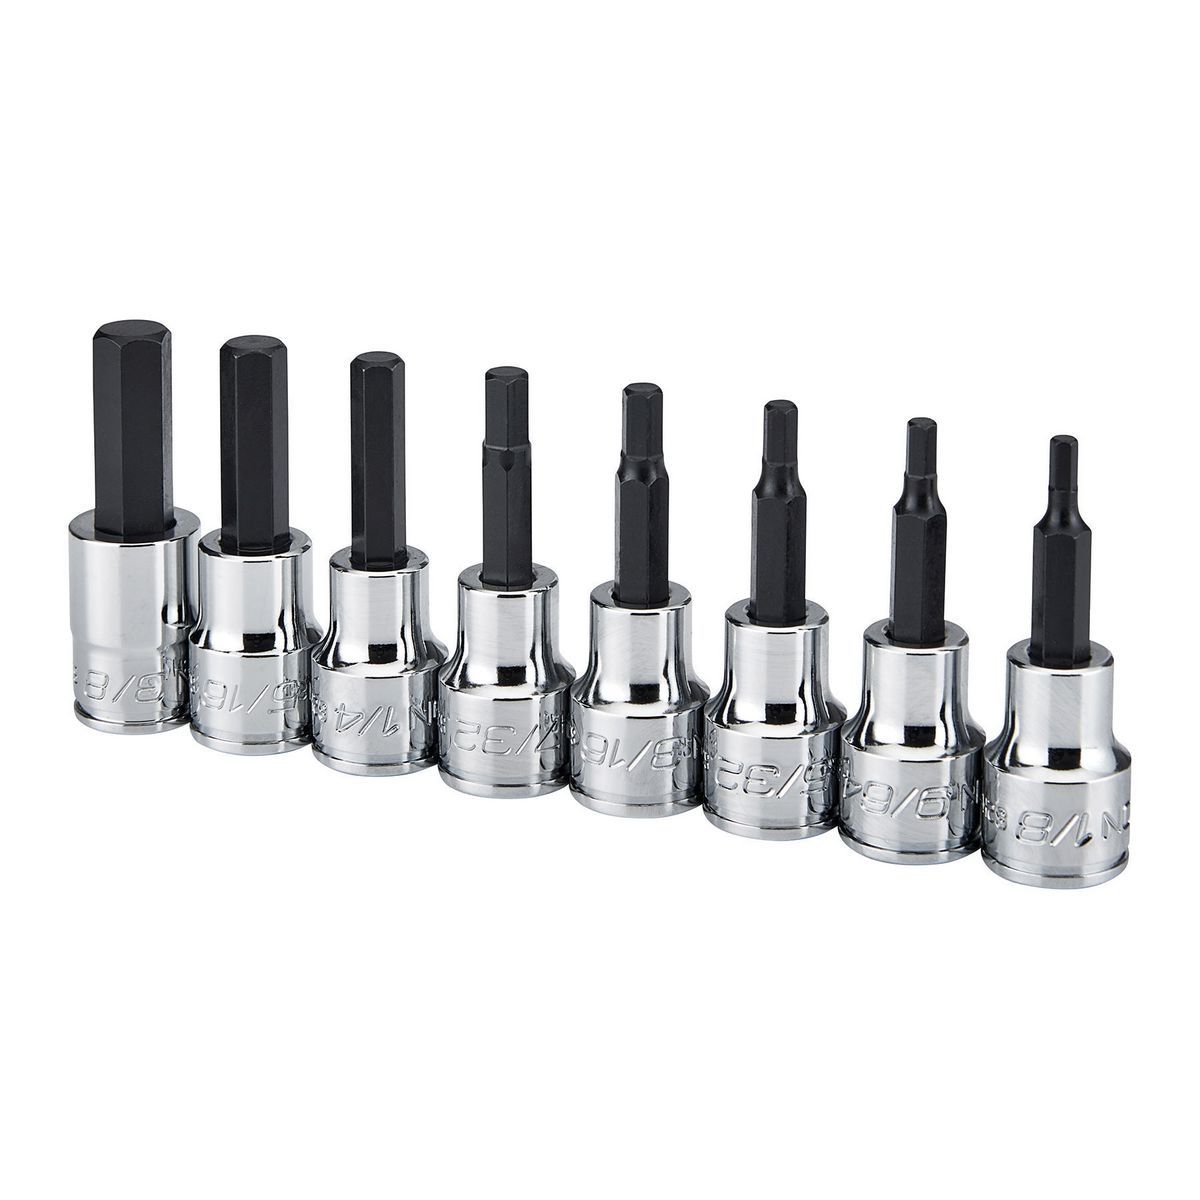 ICON 3/8 in. Drive SAE Professional Hex Bit Socket Set, 8 Piece